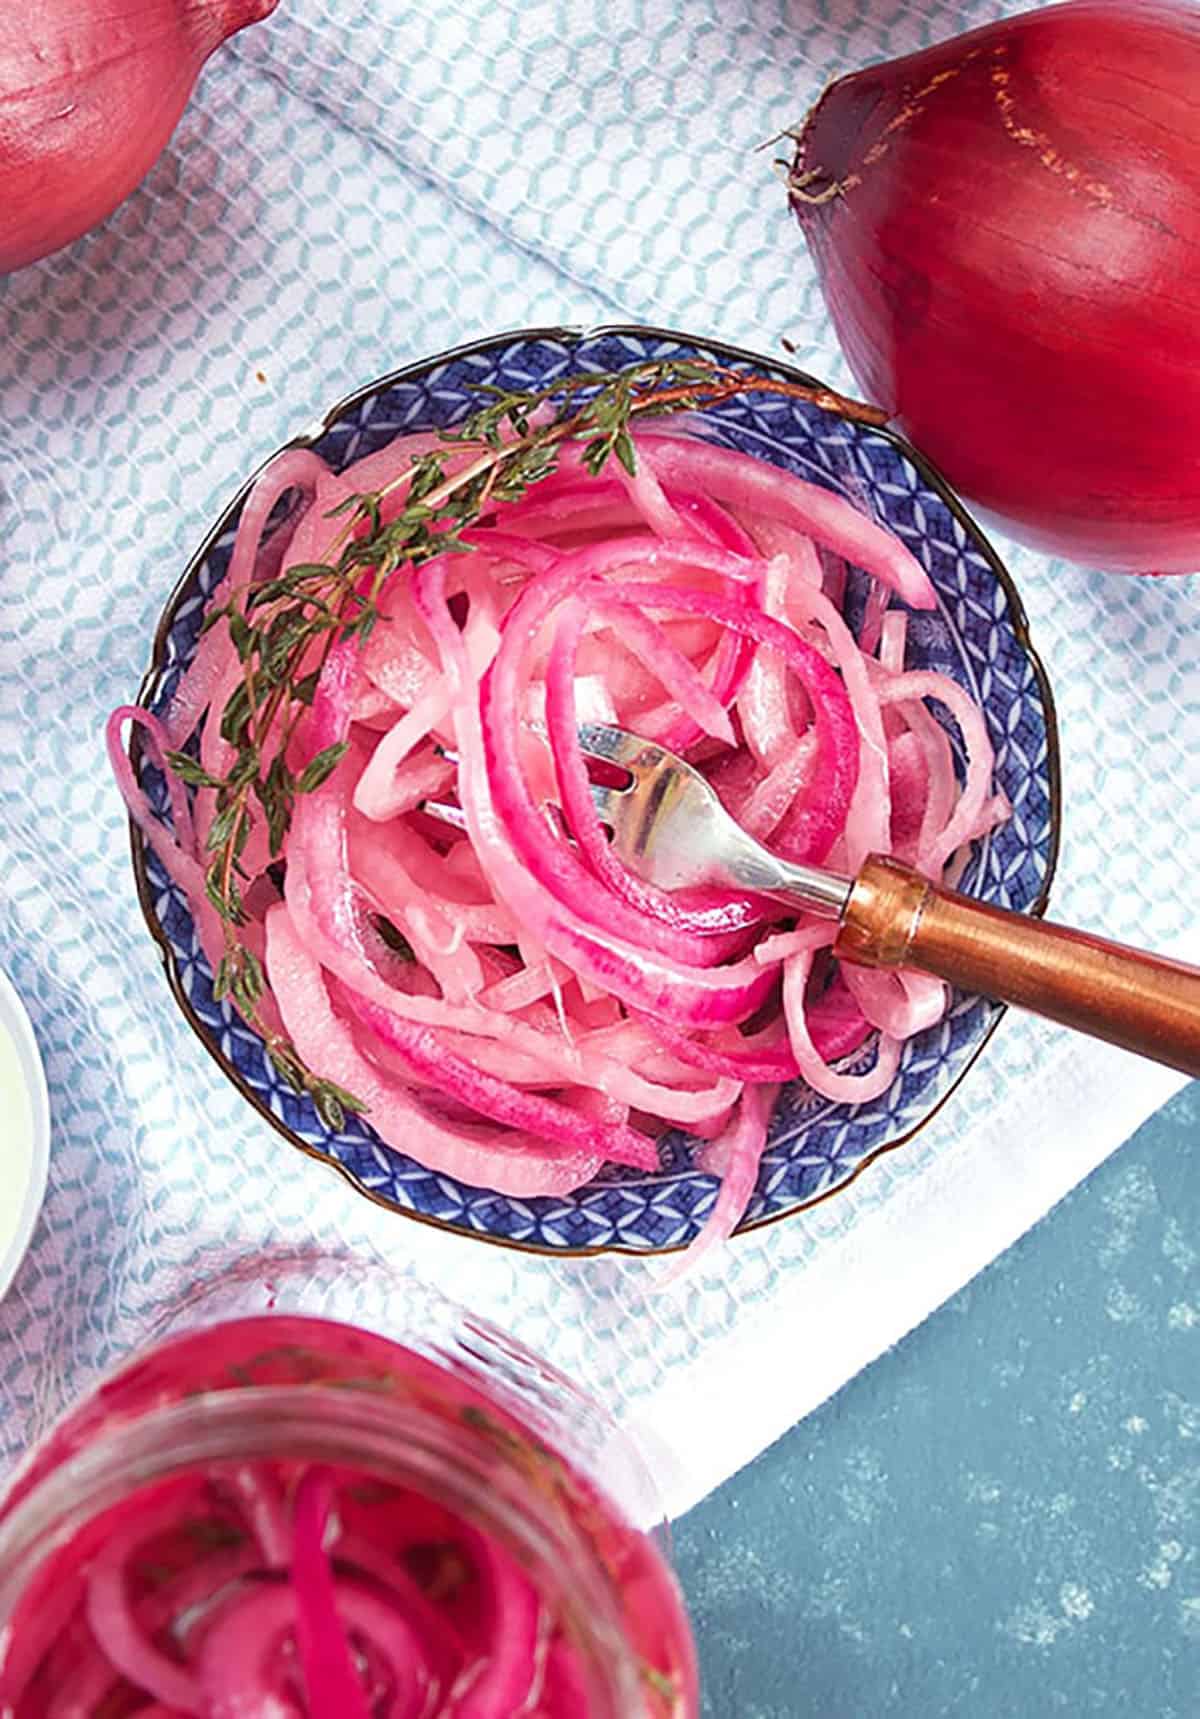 https://thesuburbansoapbox.com/wp-content/uploads/2021/01/Pickled-Red-Onions.jpg